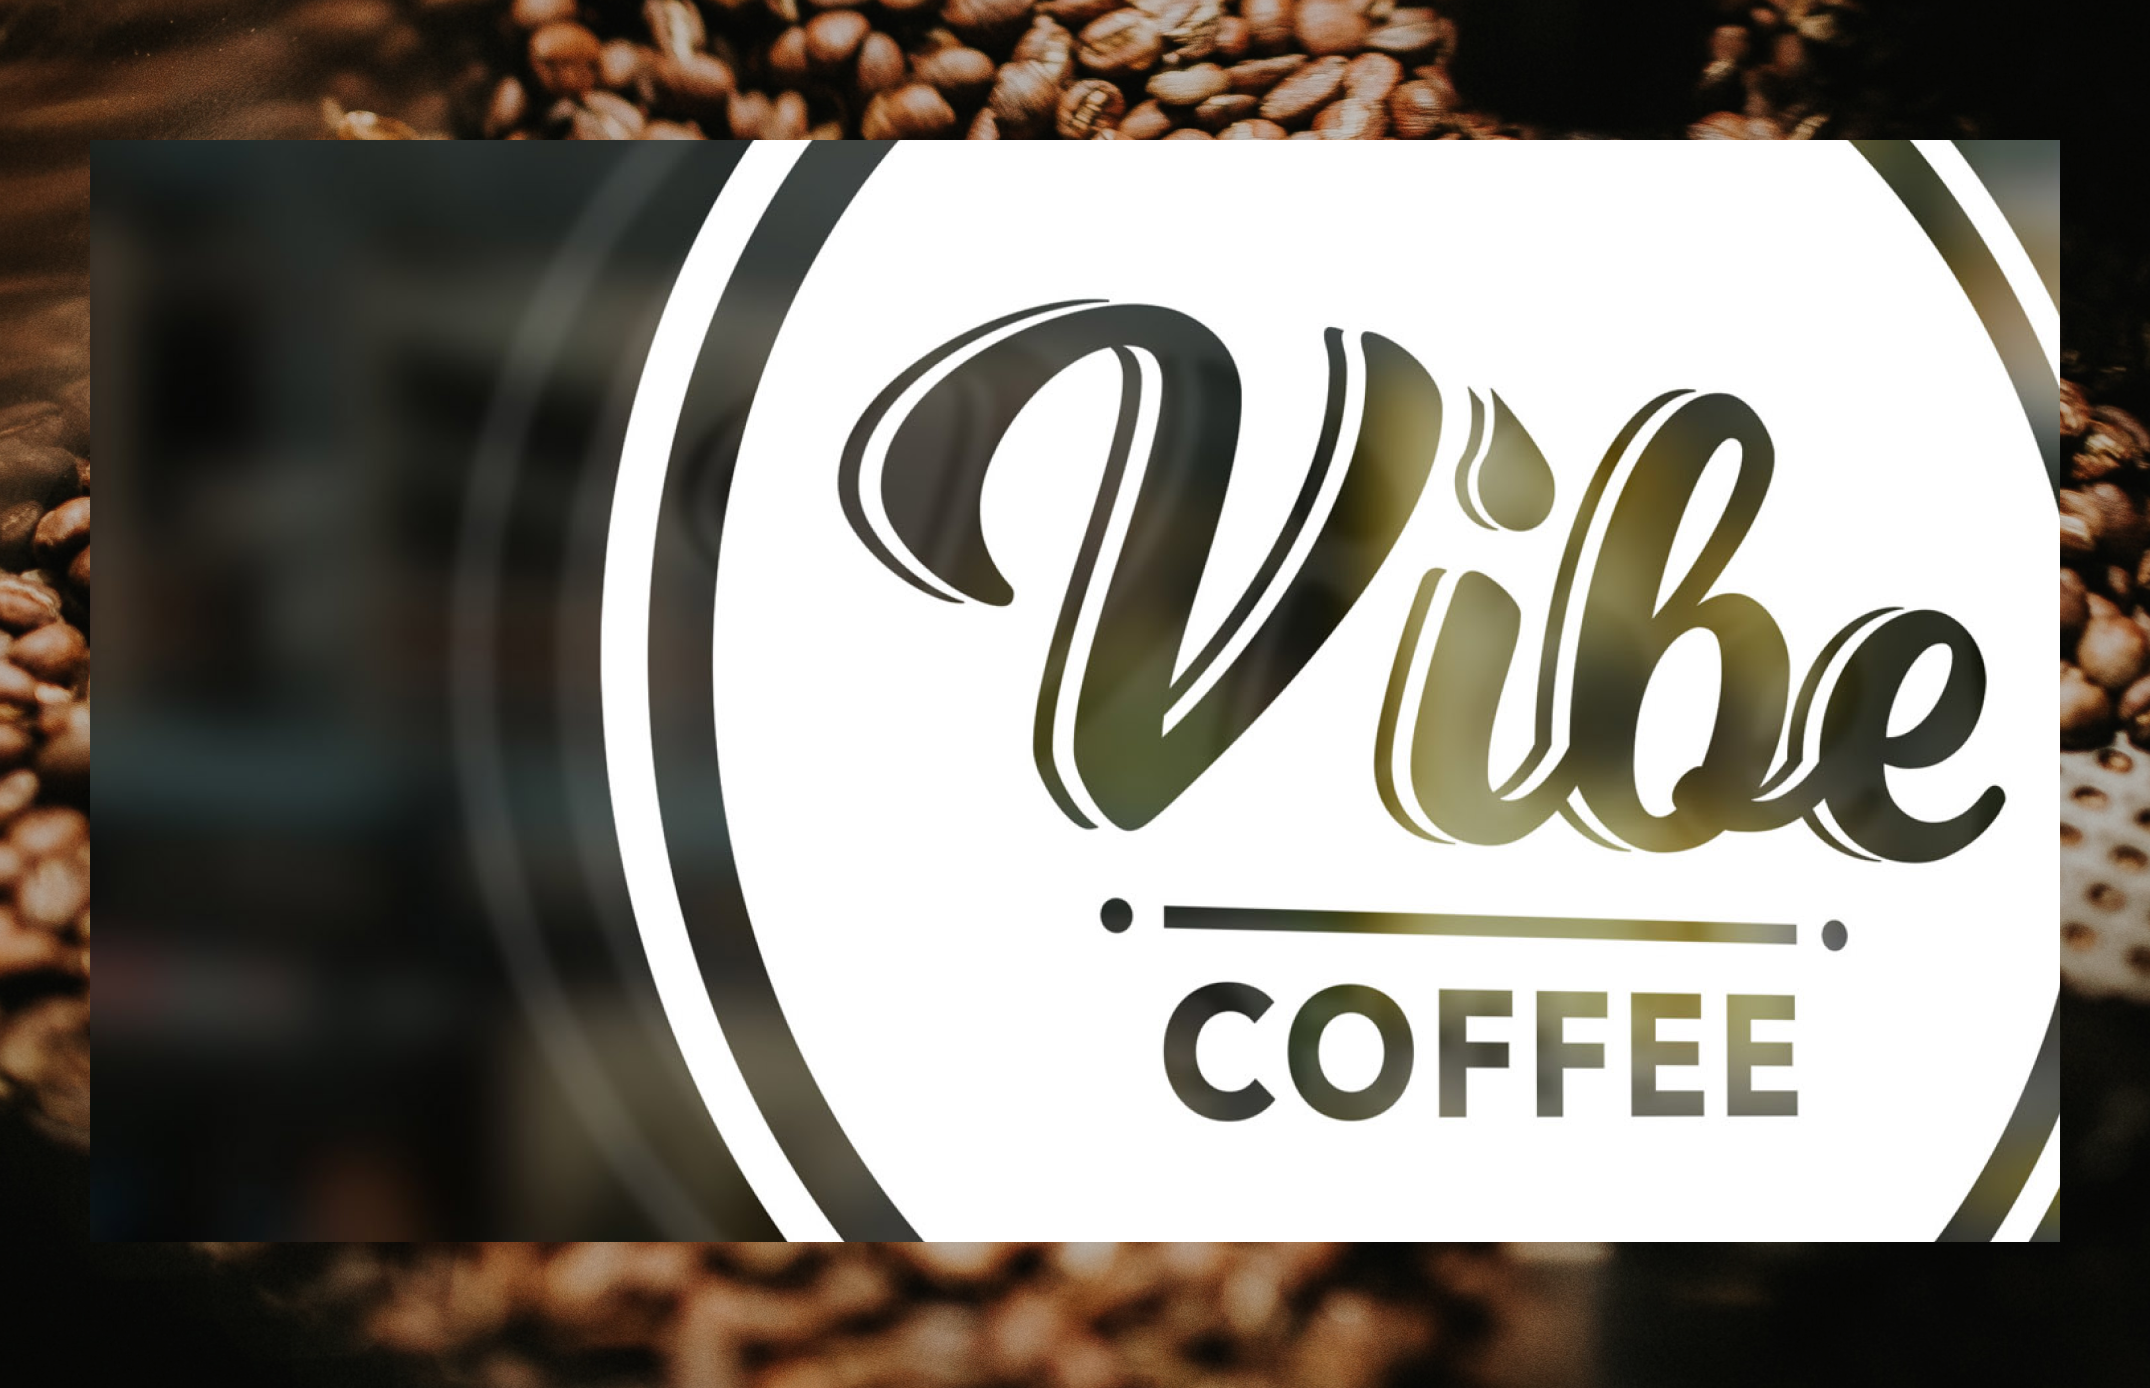 Coffee beans and the vibe coffee logo